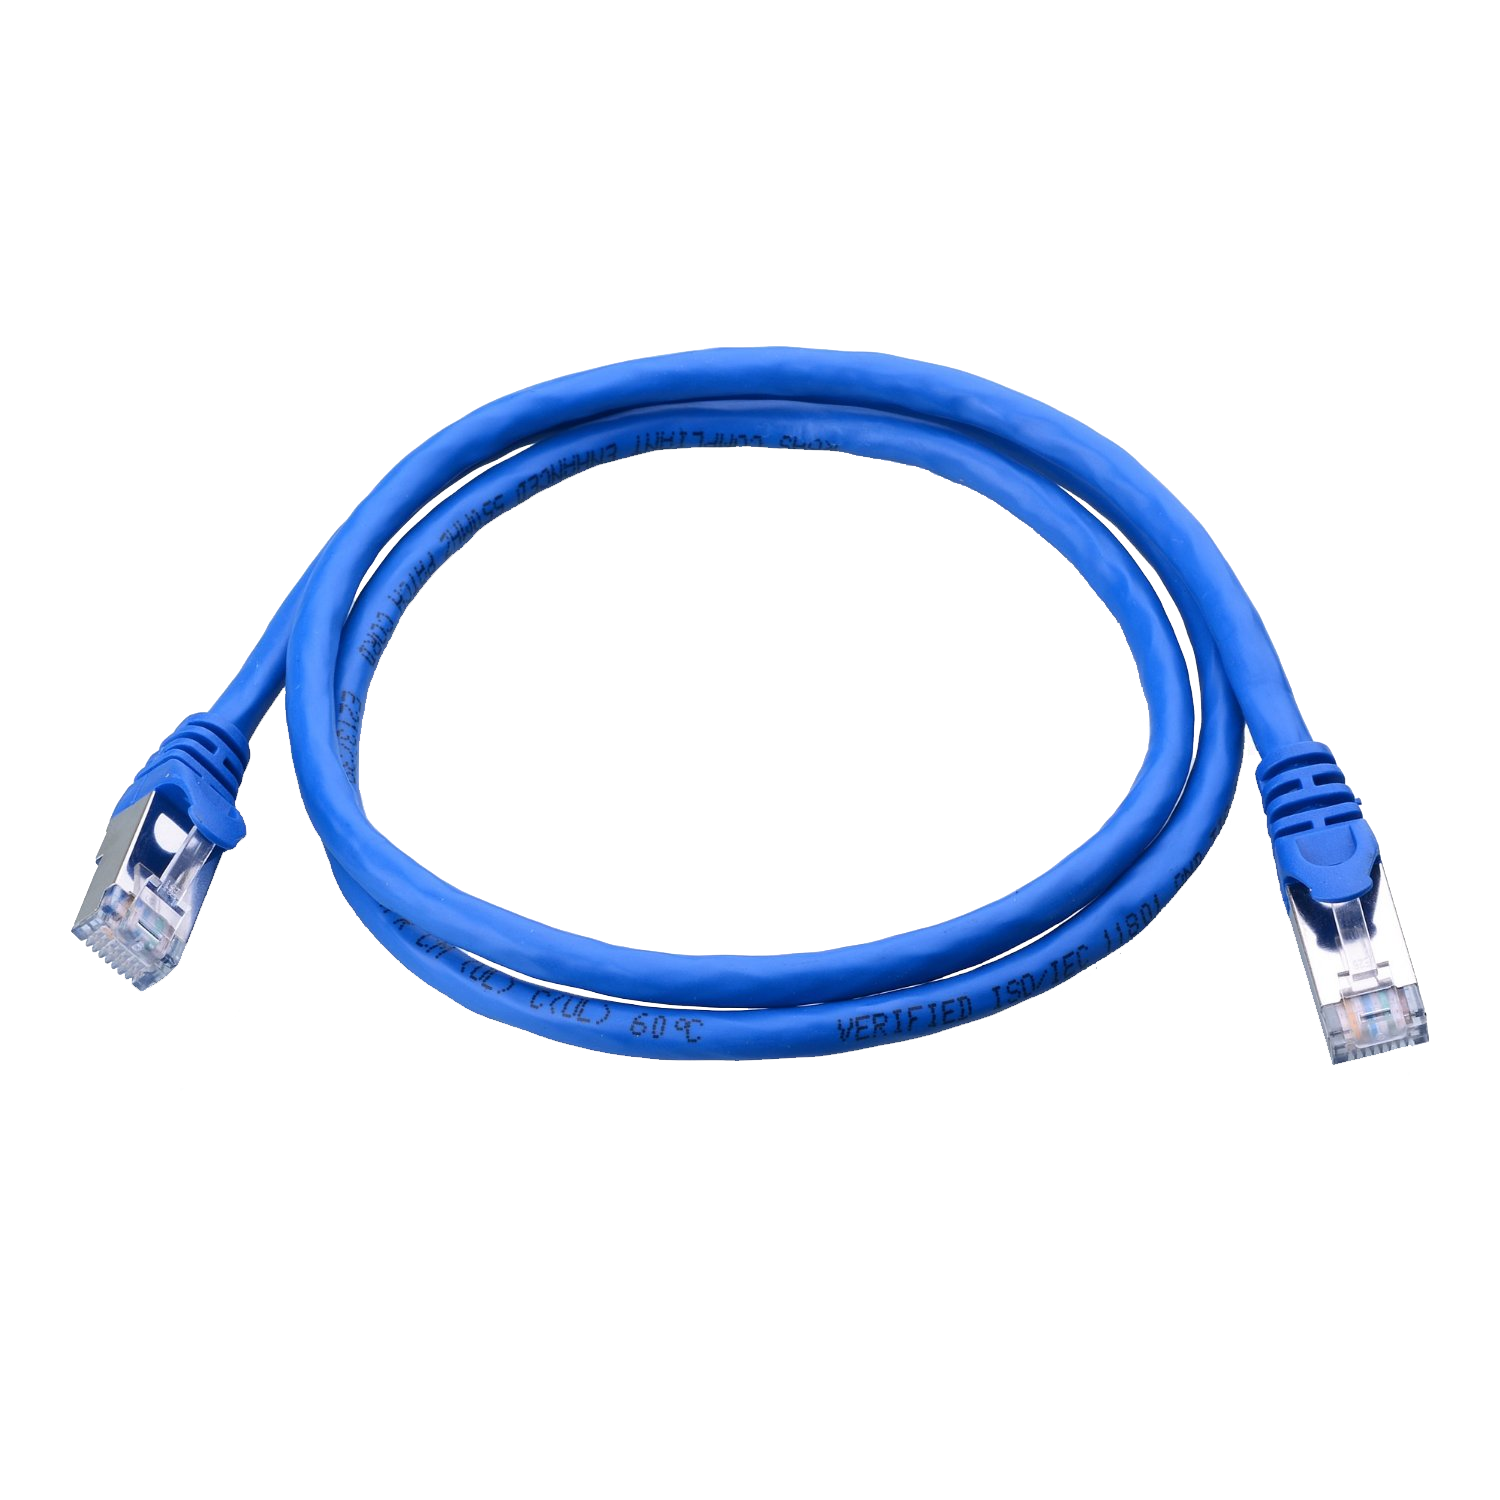 Network Cable PNG - 161225